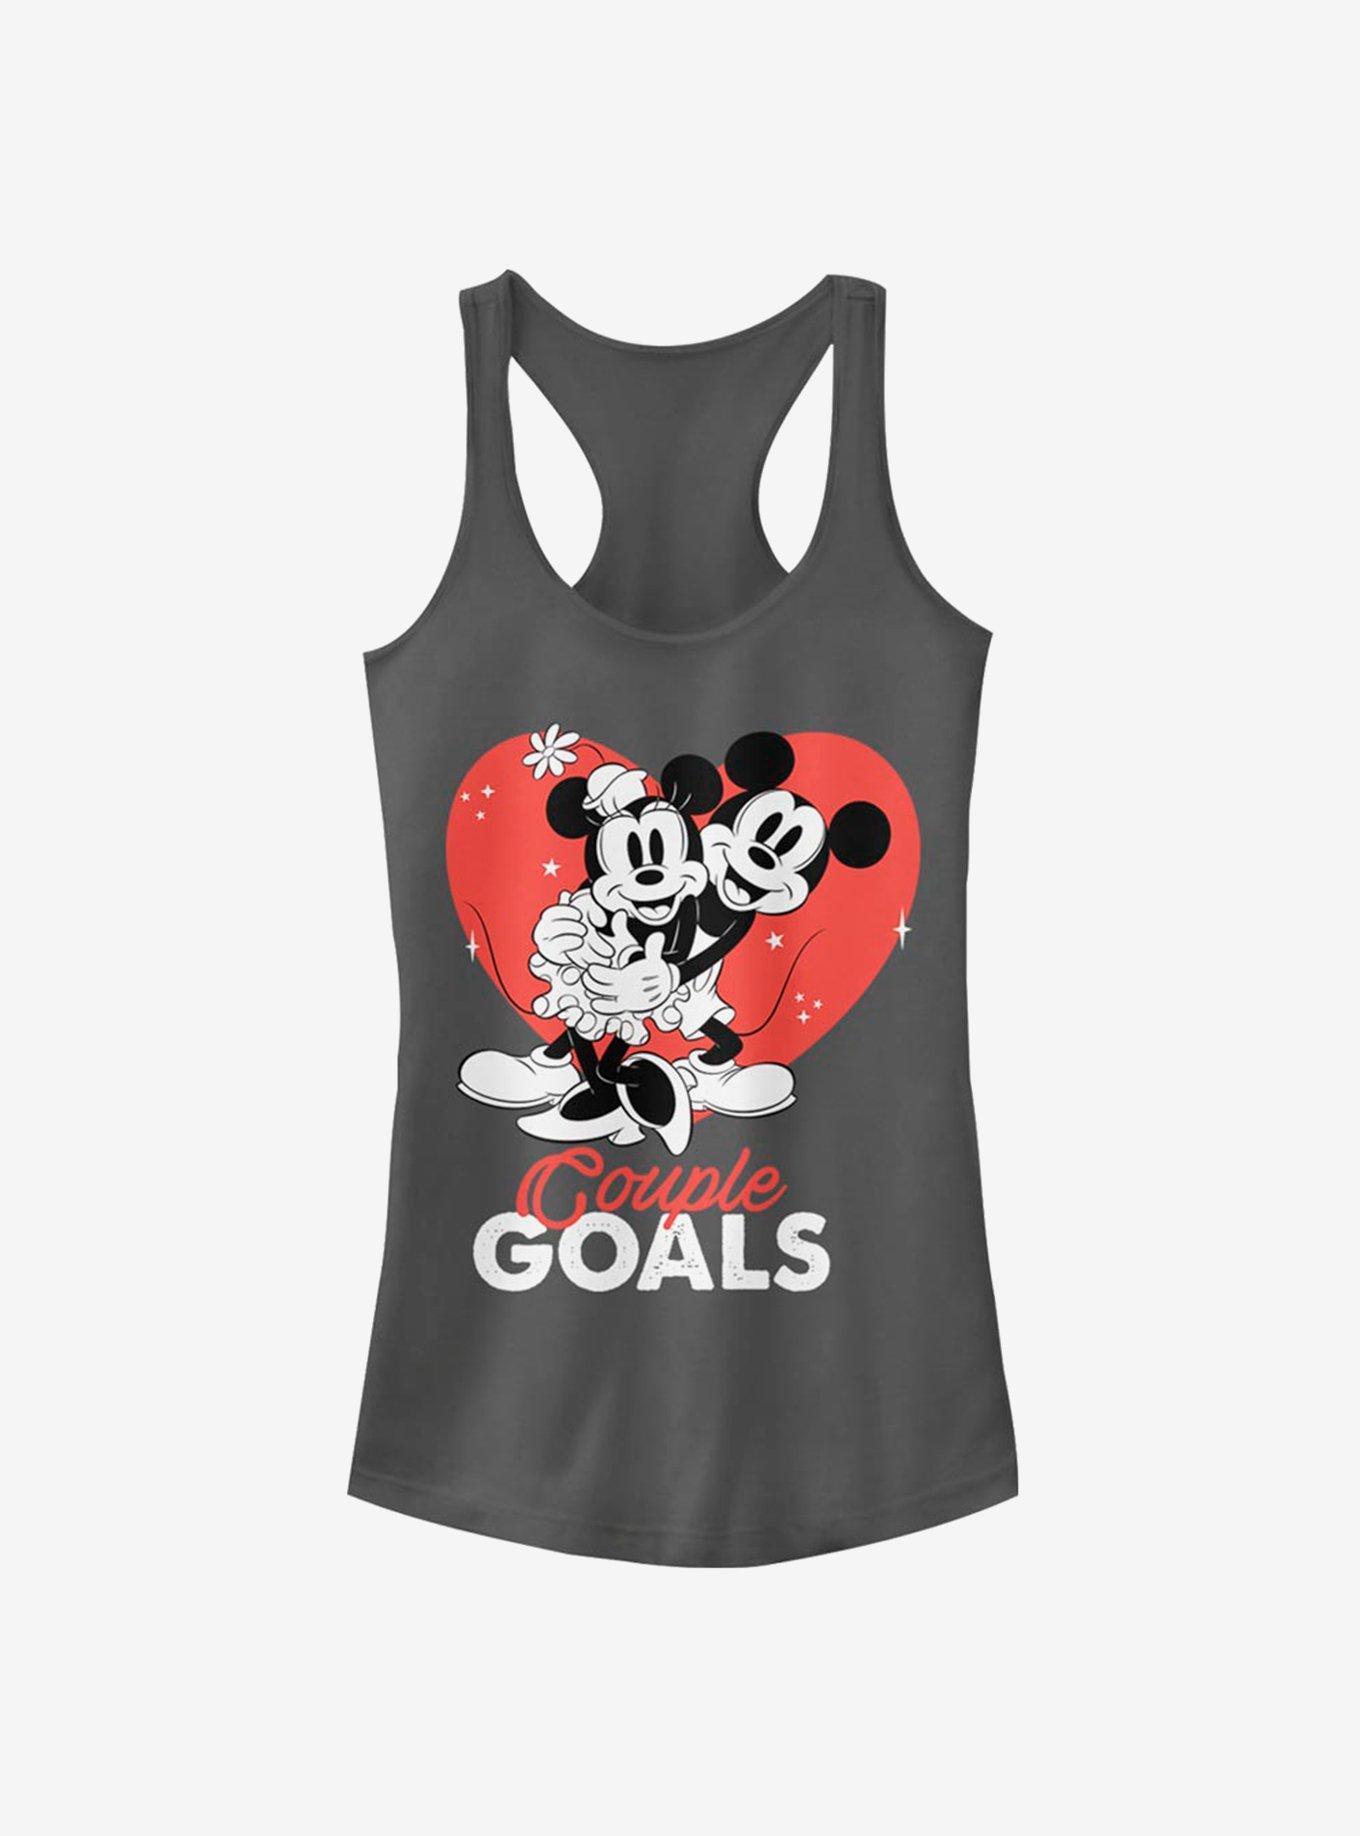 Disney Mickey Mouse & Minnie Mouse Couple Goals Girls Tank Top - GREY